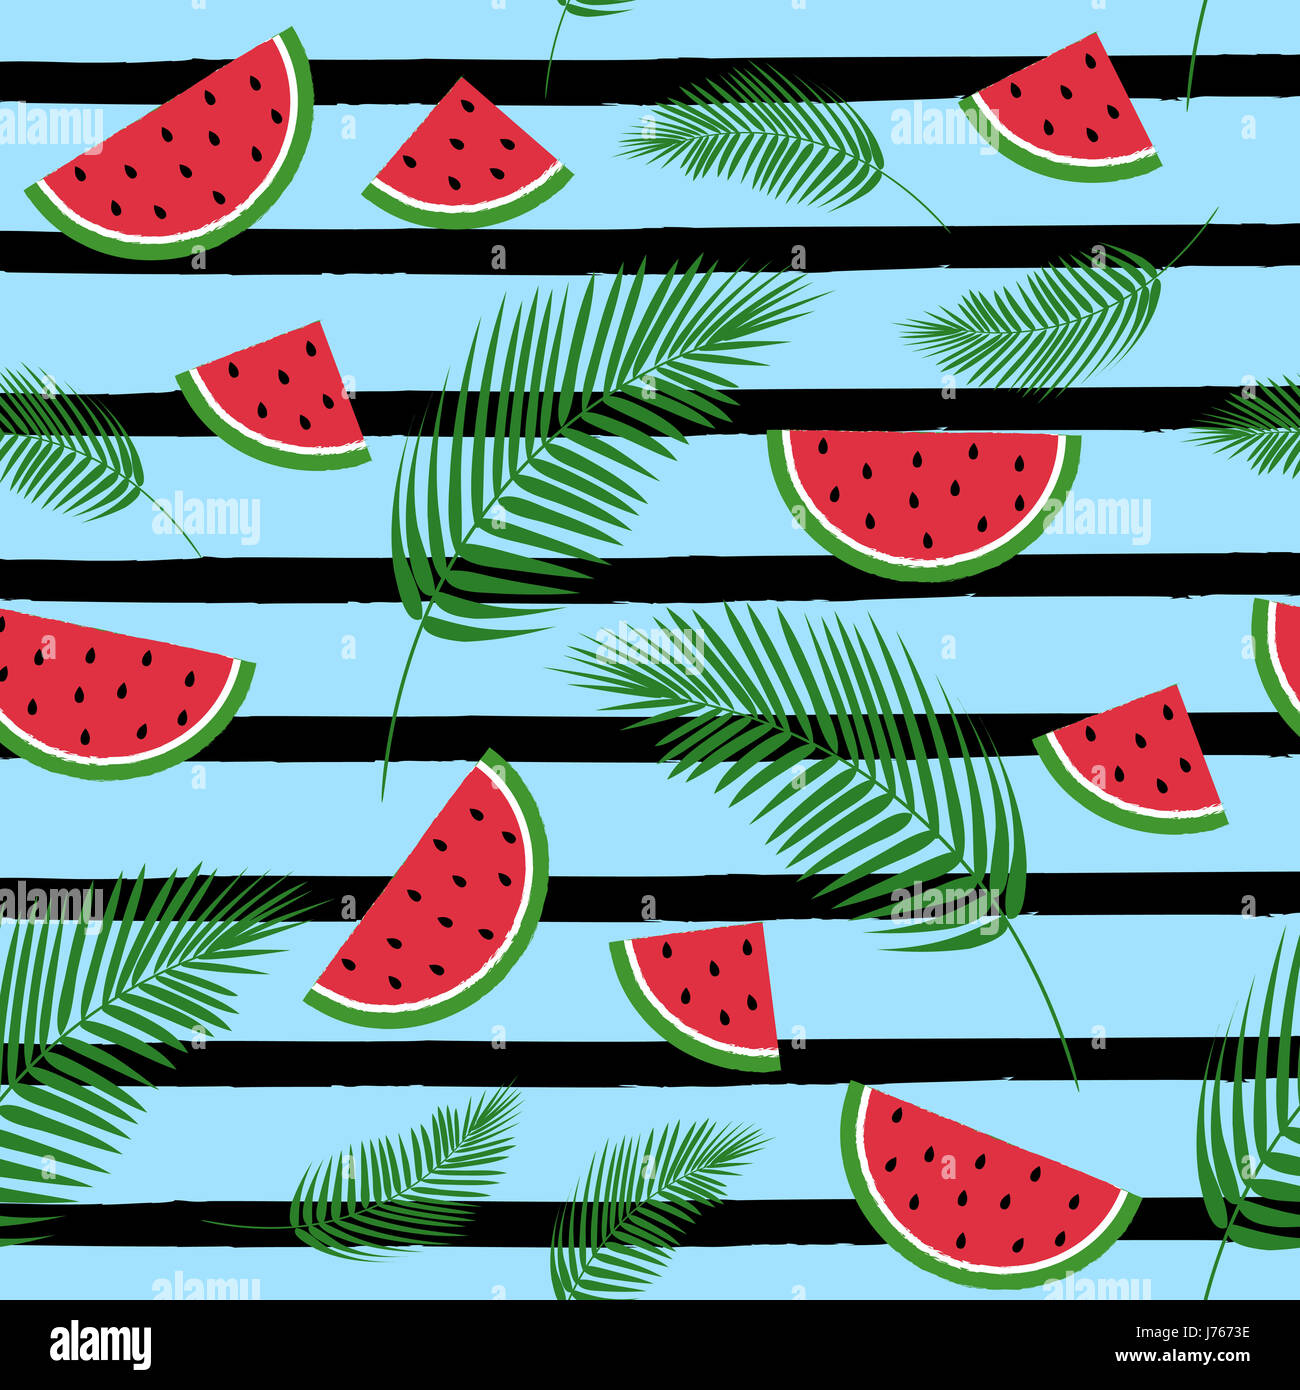 Summer exotic pattern with fresh watermelons Stock Photo